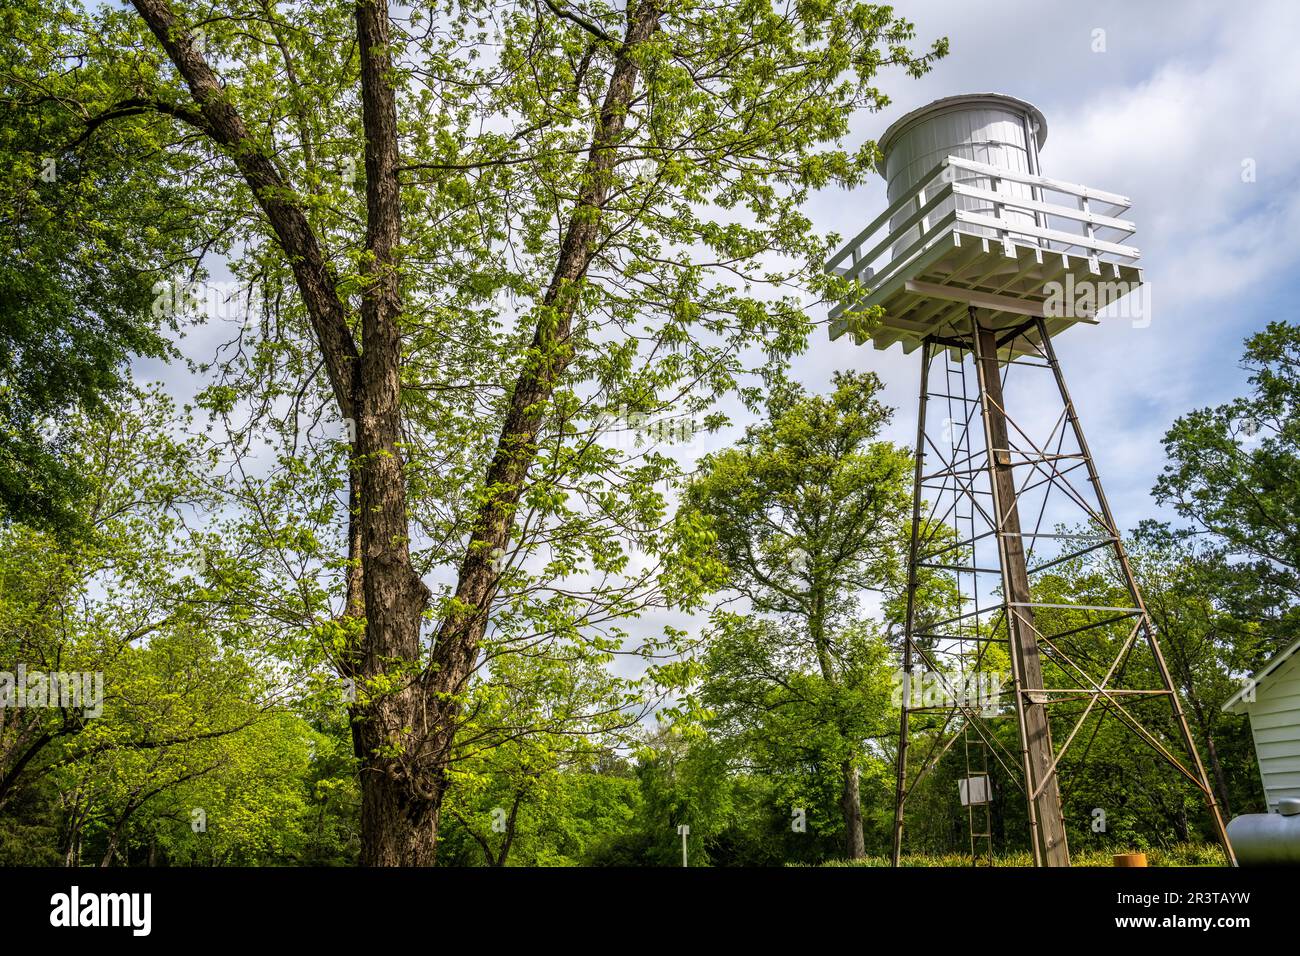 Water tower at Andalusia Farm, home of American Southern gothic writer Flannery O'Connor (1925-1964). (USA) Stock Photo